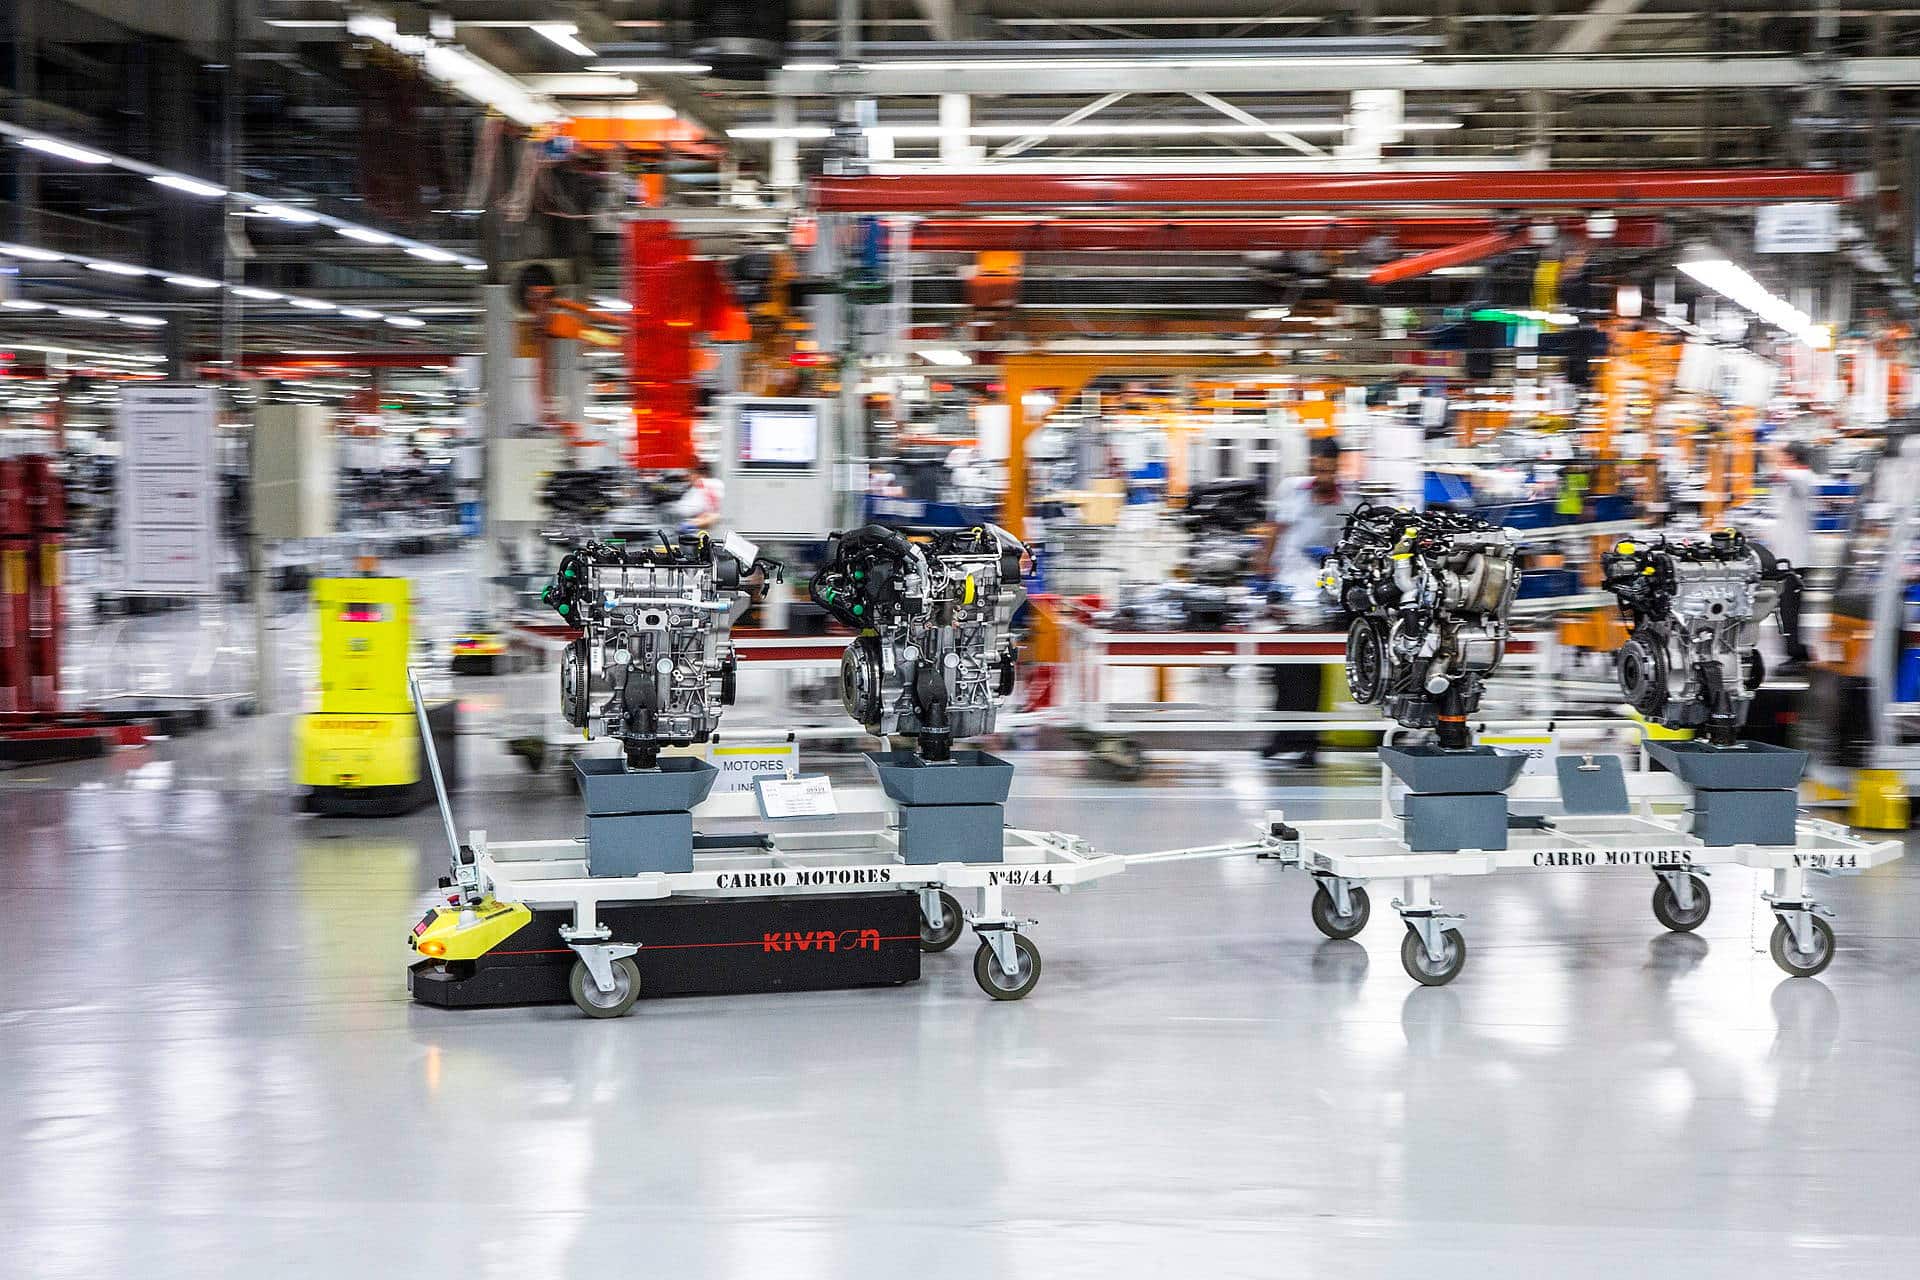 Image of an automated guided vehicle in factory pulling three engine blocks. License: MakoGomez90 (https://commons.wikimedia.org/wiki/File:AGV_con_carro.jpg), „AGV con carro“, https://creativecommons.org/licenses/by-sa/4.0/legalcode